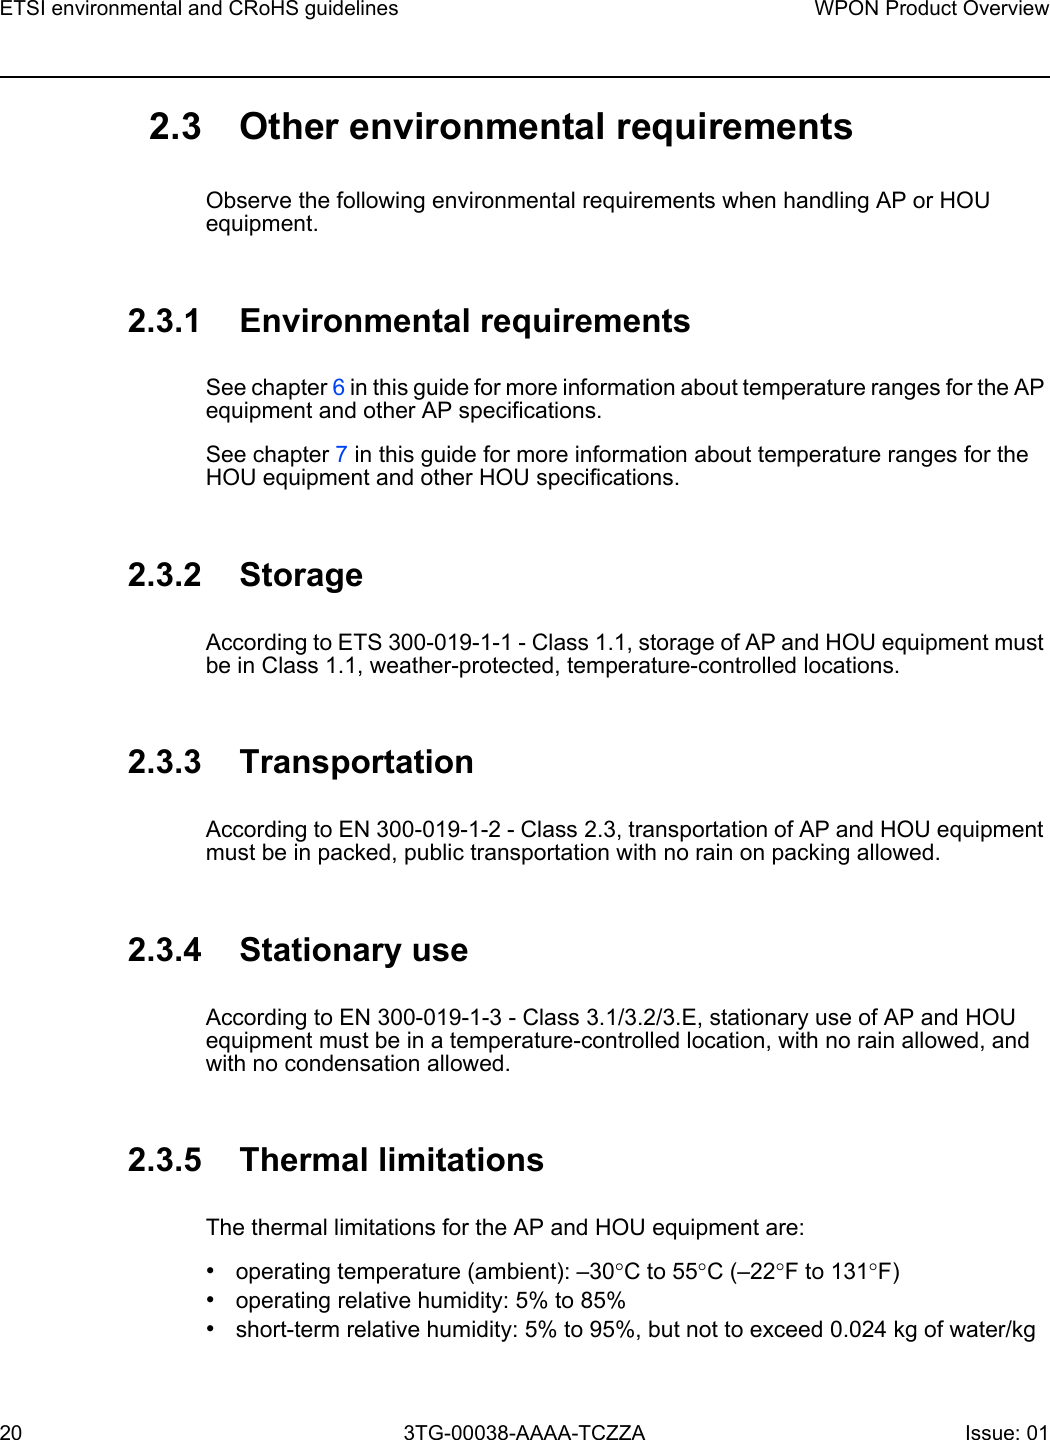 ETSI environmental and CRoHS guidelines20WPON Product Overview3TG-00038-AAAA-TCZZA Issue: 01 2.3 Other environmental requirementsObserve the following environmental requirements when handling AP or HOU equipment.2.3.1 Environmental requirementsSee chapter 6 in this guide for more information about temperature ranges for the AP equipment and other AP specifications. See chapter 7 in this guide for more information about temperature ranges for the HOU equipment and other HOU specifications. 2.3.2 StorageAccording to ETS 300-019-1-1 - Class 1.1, storage of AP and HOU equipment must be in Class 1.1, weather-protected, temperature-controlled locations. 2.3.3 TransportationAccording to EN 300-019-1-2 - Class 2.3, transportation of AP and HOU equipment must be in packed, public transportation with no rain on packing allowed.2.3.4 Stationary useAccording to EN 300-019-1-3 - Class 3.1/3.2/3.E, stationary use of AP and HOU equipment must be in a temperature-controlled location, with no rain allowed, and with no condensation allowed. 2.3.5 Thermal limitationsThe thermal limitations for the AP and HOU equipment are: •operating temperature (ambient): –30°C to 55°C (–22°F to 131°F)•operating relative humidity: 5% to 85%•short-term relative humidity: 5% to 95%, but not to exceed 0.024 kg of water/kg